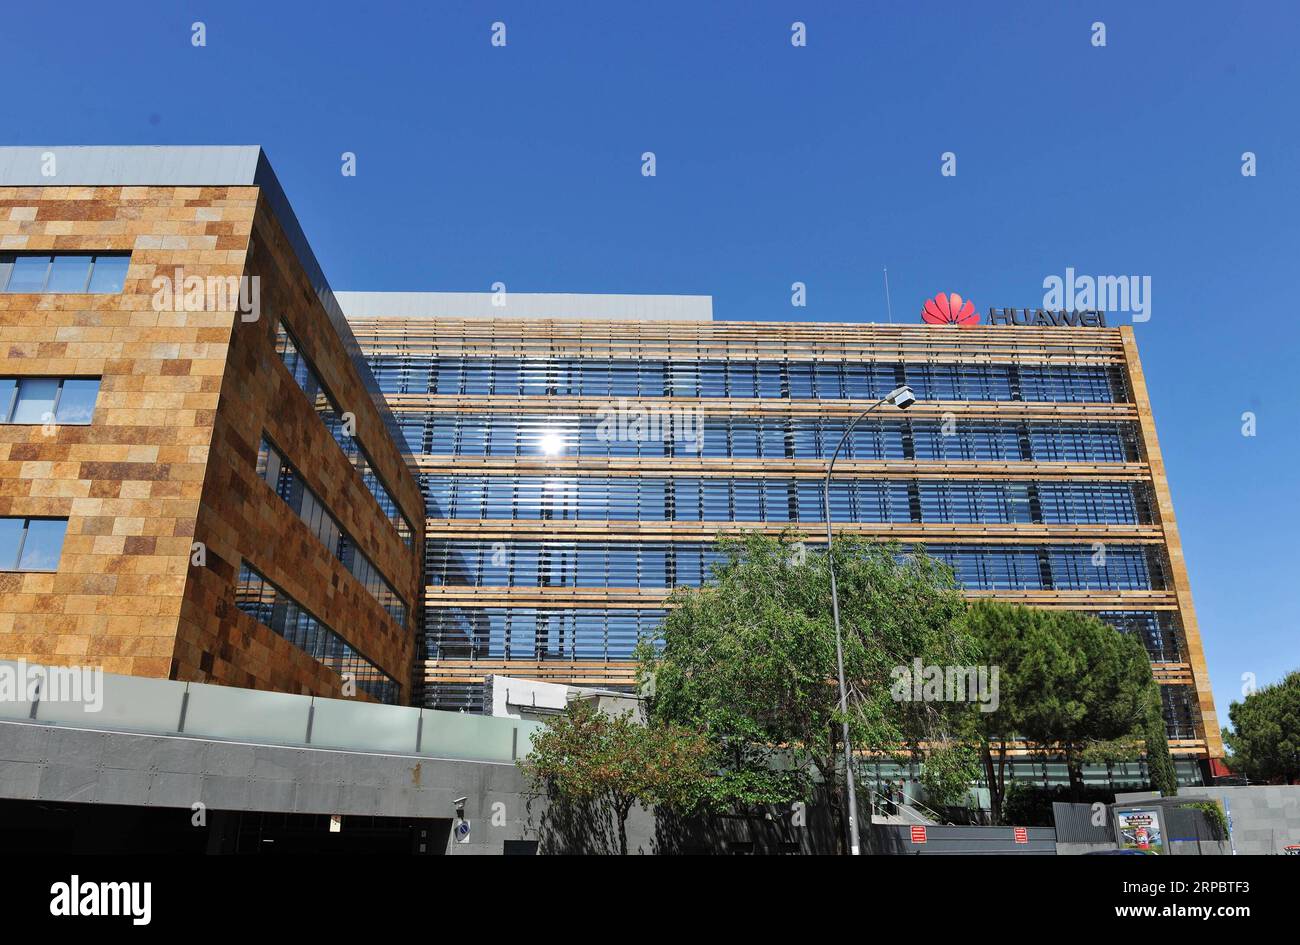 (190615) -- MADRID, June 15, 2019 (Xinhua) -- Photo taken on June 15, 2019 shows the headquarters of Huawei Spain in Madrid, Spain. In cooperation with Chinese telecom giant Huawei, Vodafone Espana on Saturday rolled out the first commercial 5G mobile services in Spain, making it one of the first European countries with the ultrafast mobile network in Europe. (Xinhua/Guo Qiuda) SPAIN-MADRID-VODAFONE-HUAWEI-FIRST 5G NETWORK PUBLICATIONxNOTxINxCHN Stock Photo